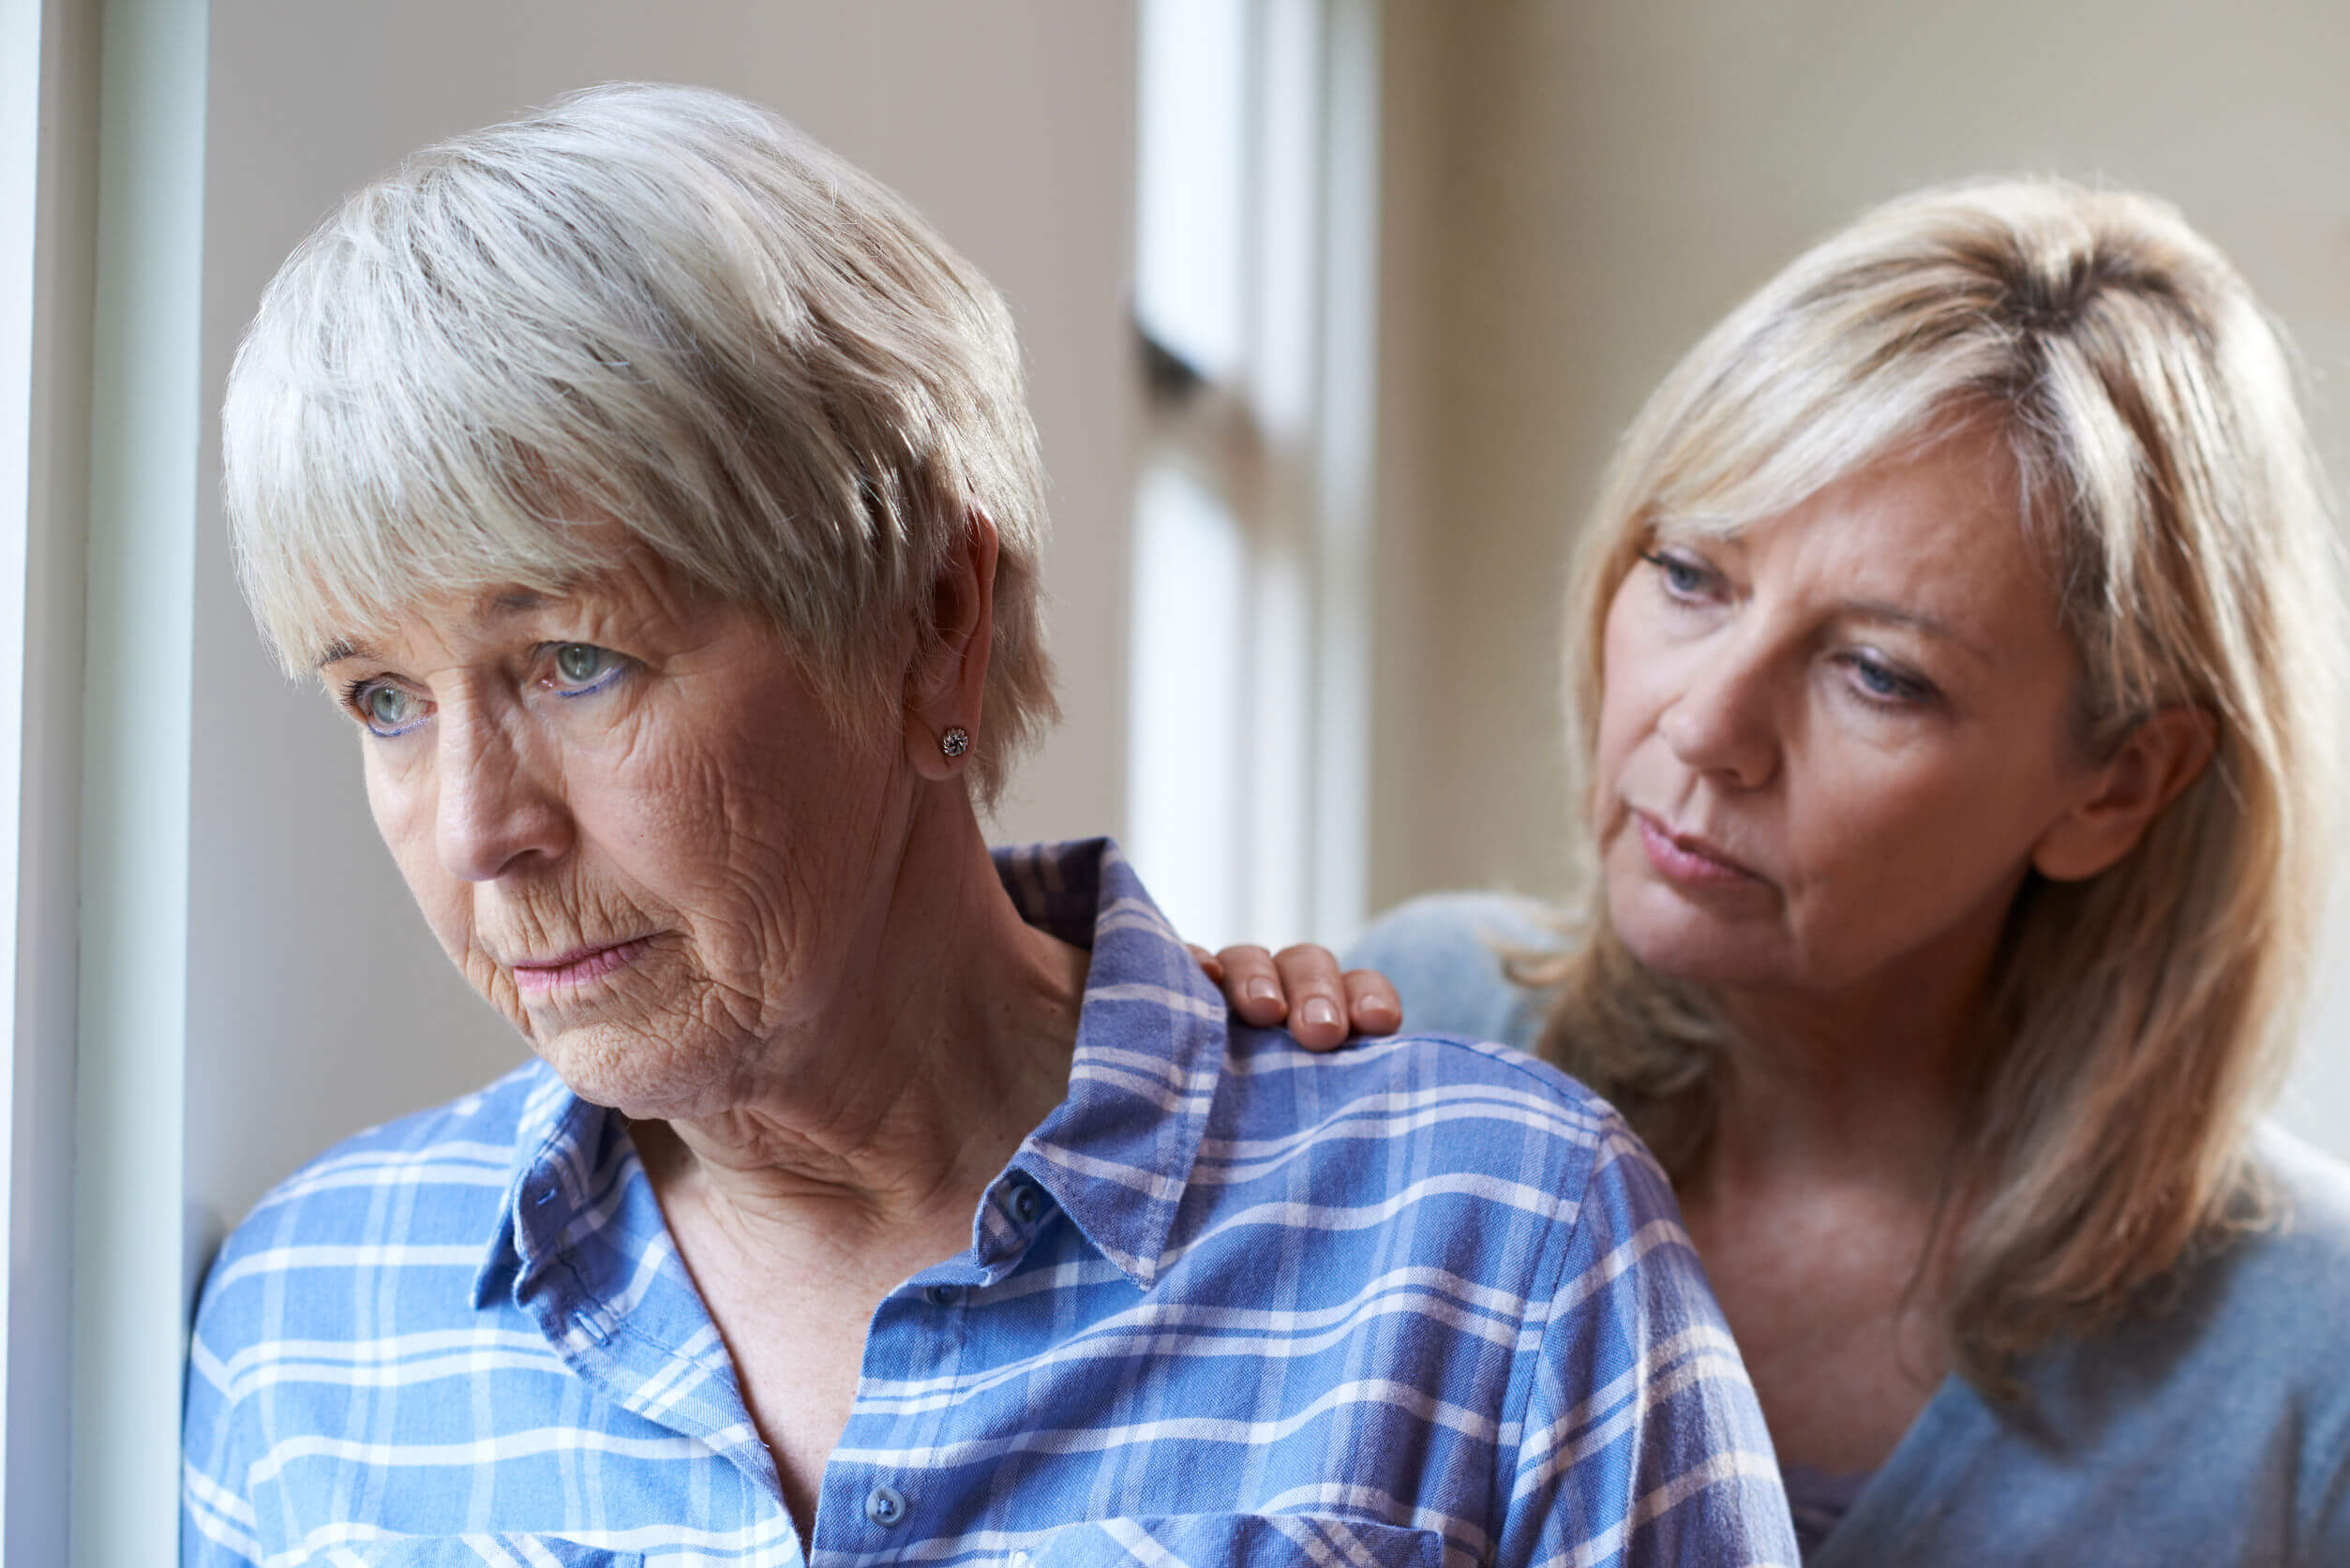 Caregiver syndrome can be effectively addressed.